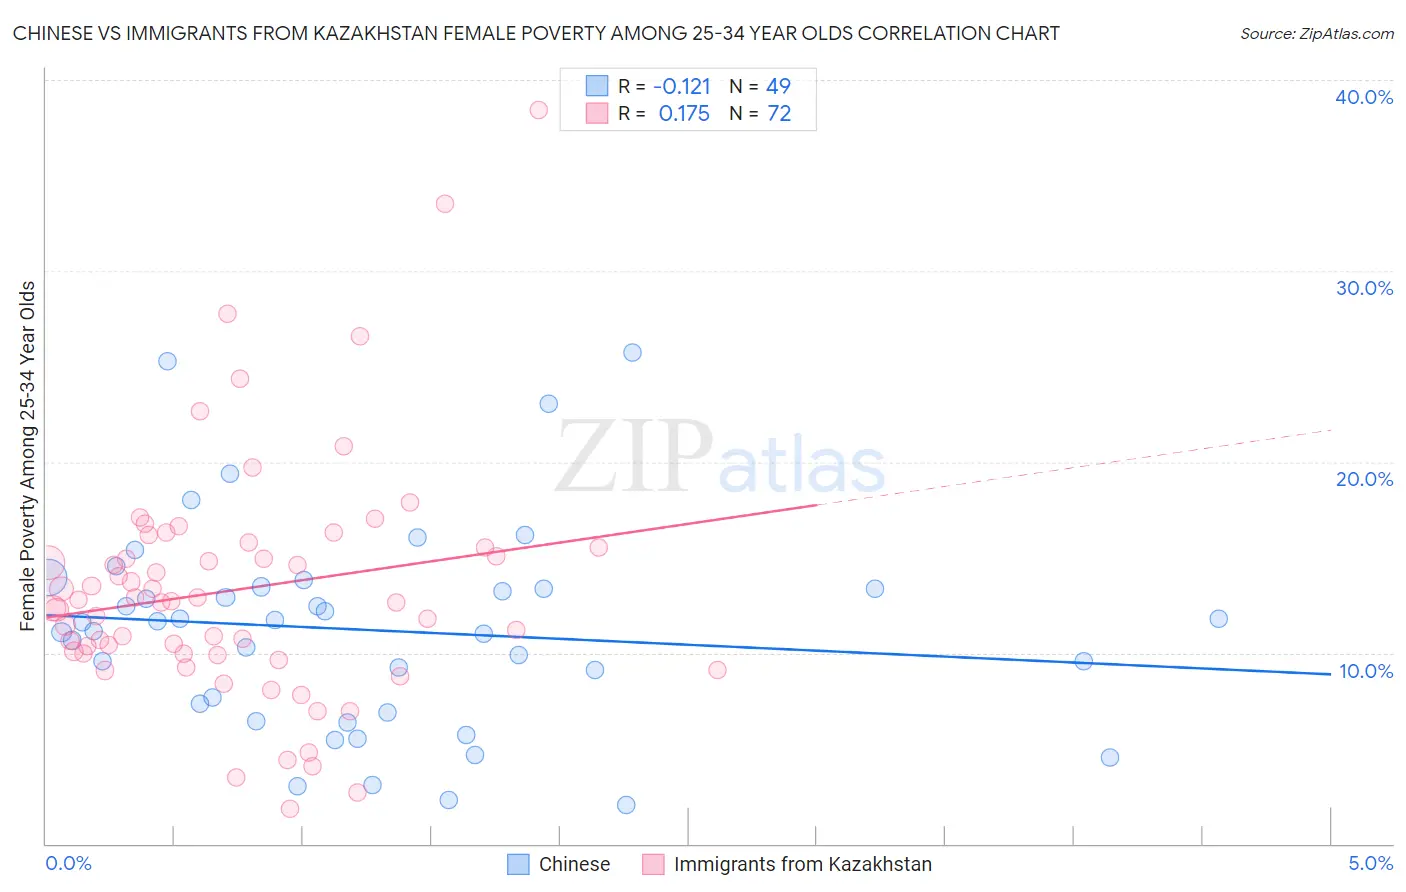 Chinese vs Immigrants from Kazakhstan Female Poverty Among 25-34 Year Olds